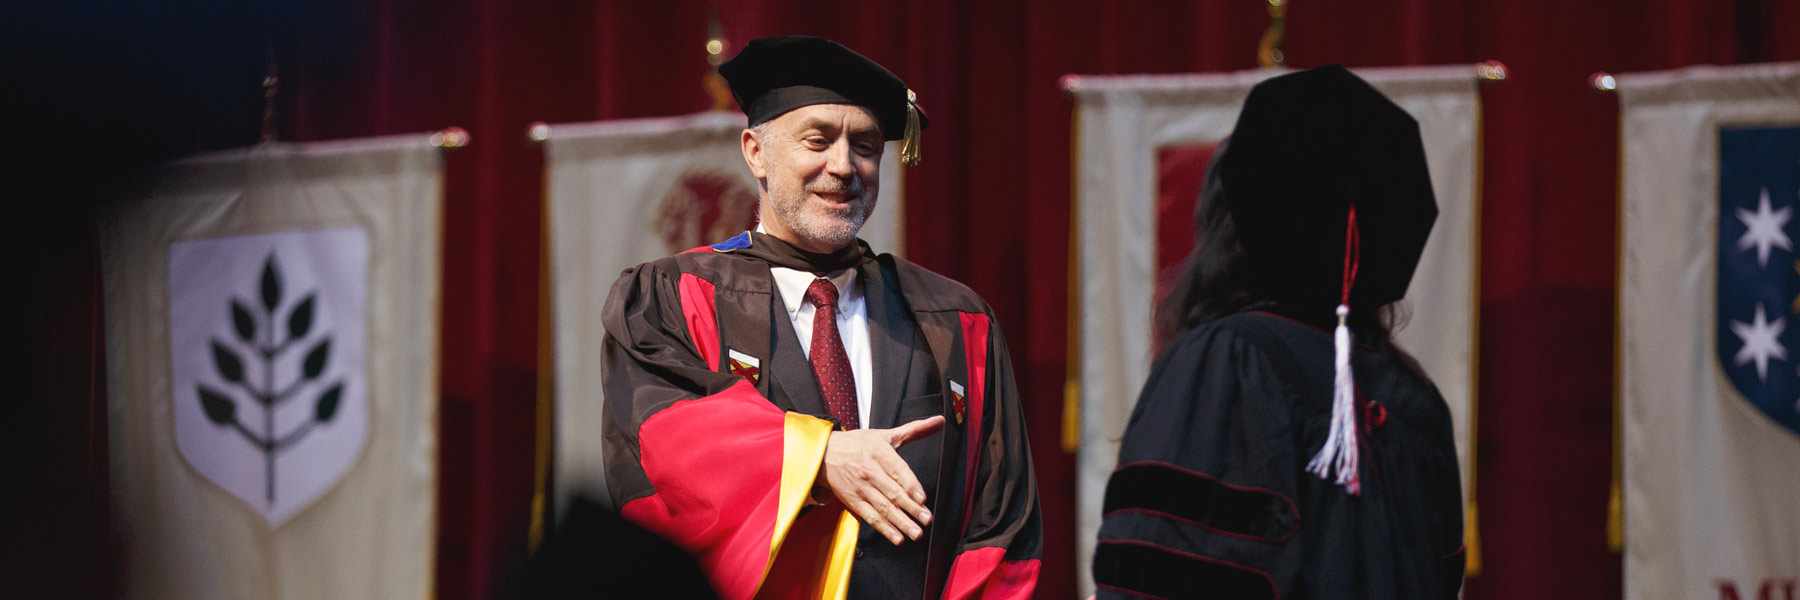 Graduate School Dean David Daleke shaking a student's hand at Commencement.